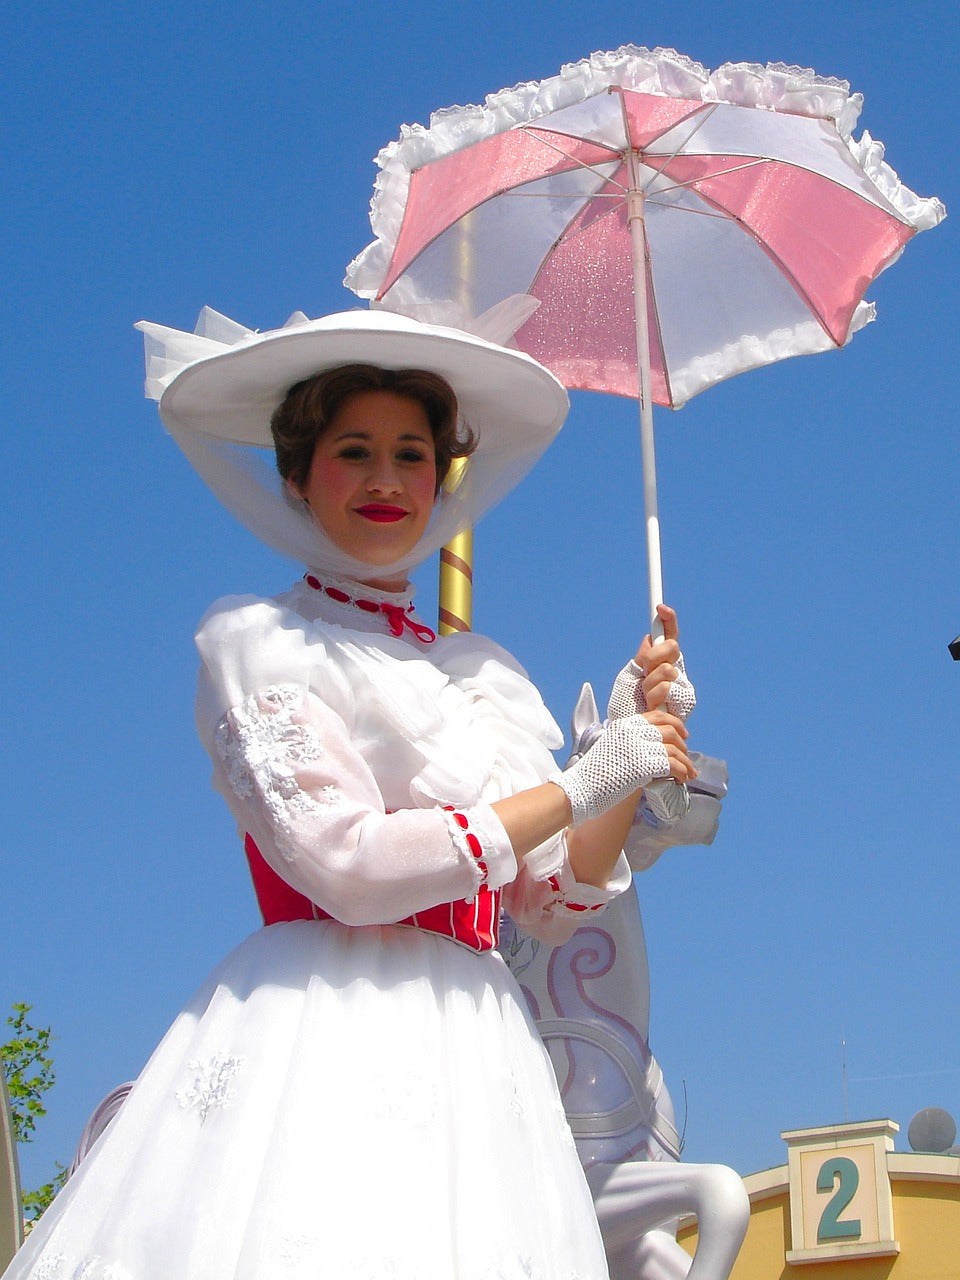 A woman in an aristocratic white dress with a red corset and an umbrella in her hands